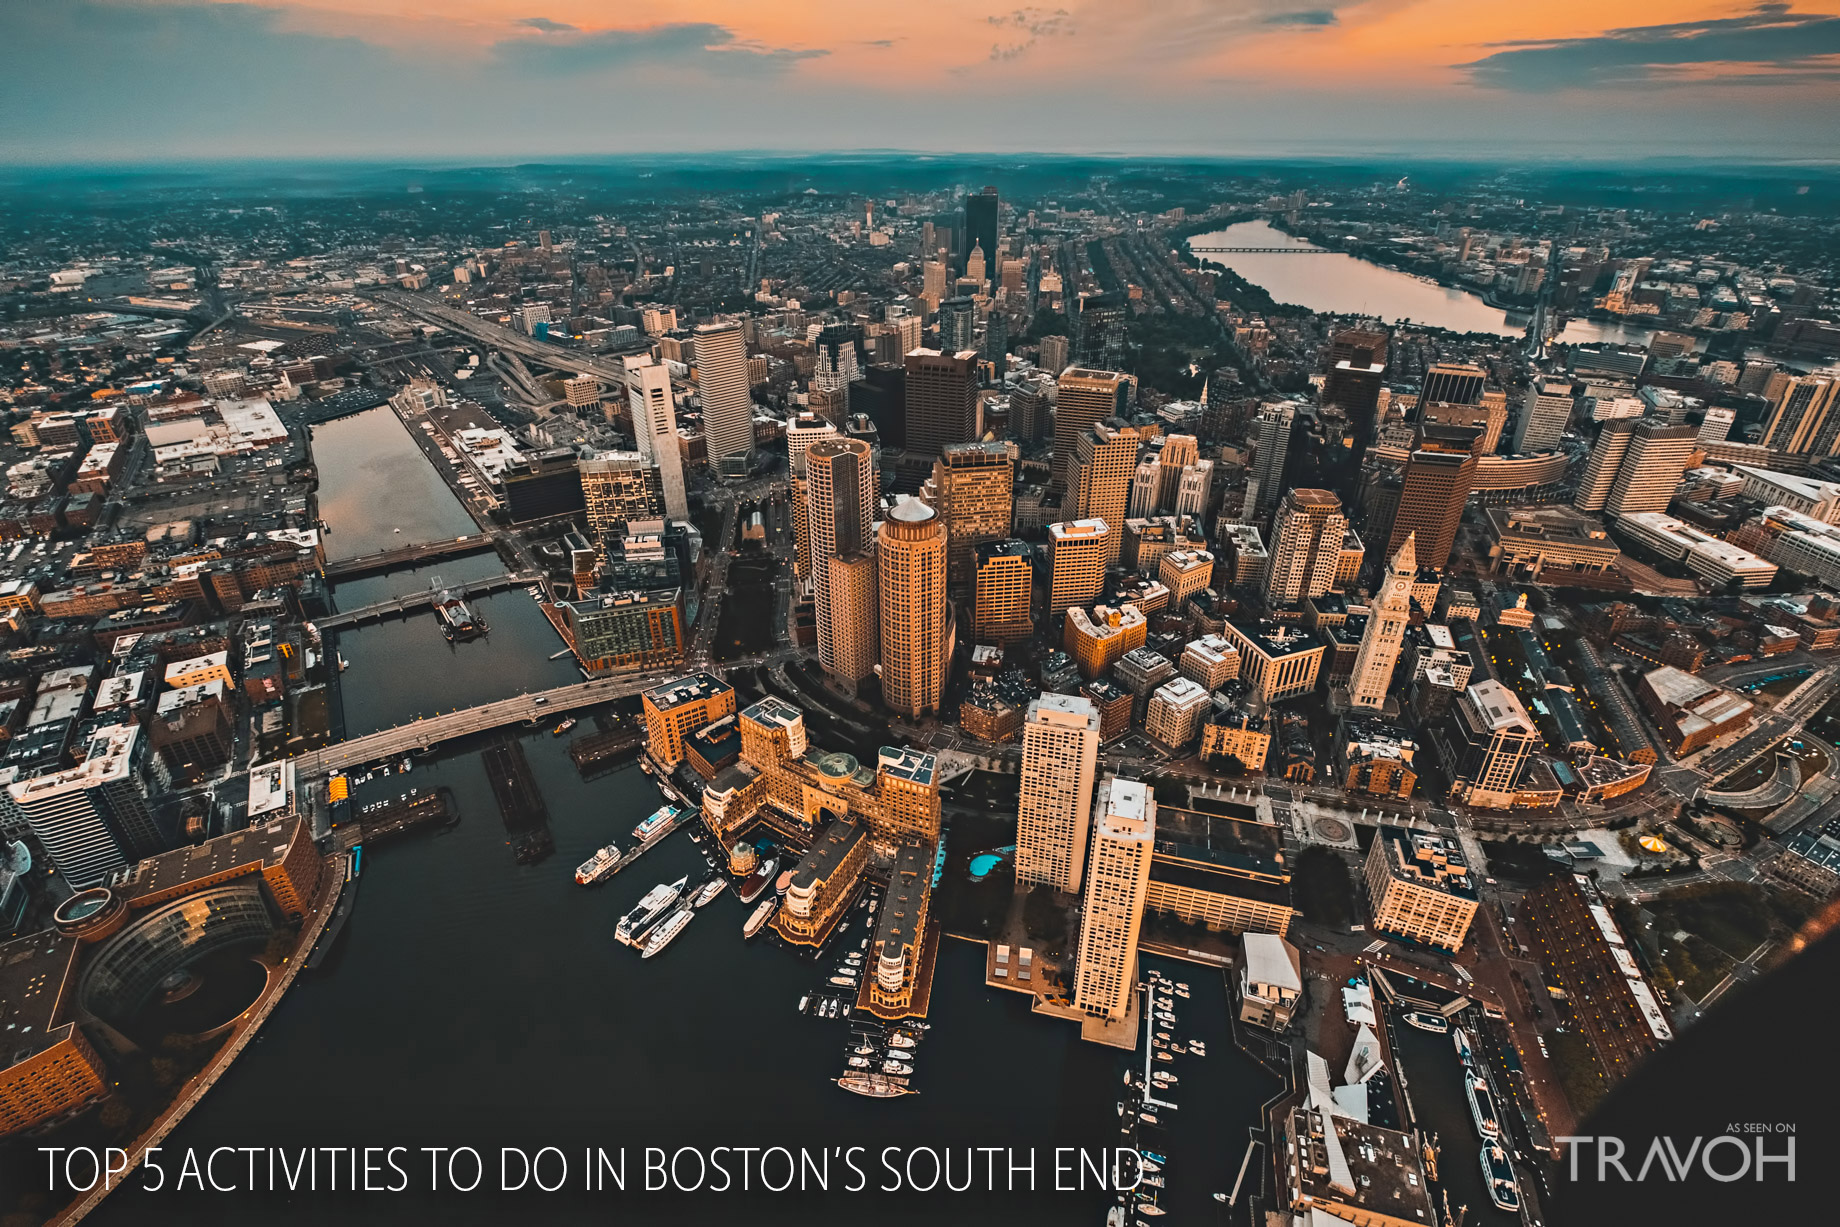 Travel Tips – Top 5 Activities To Do in Boston’s South End